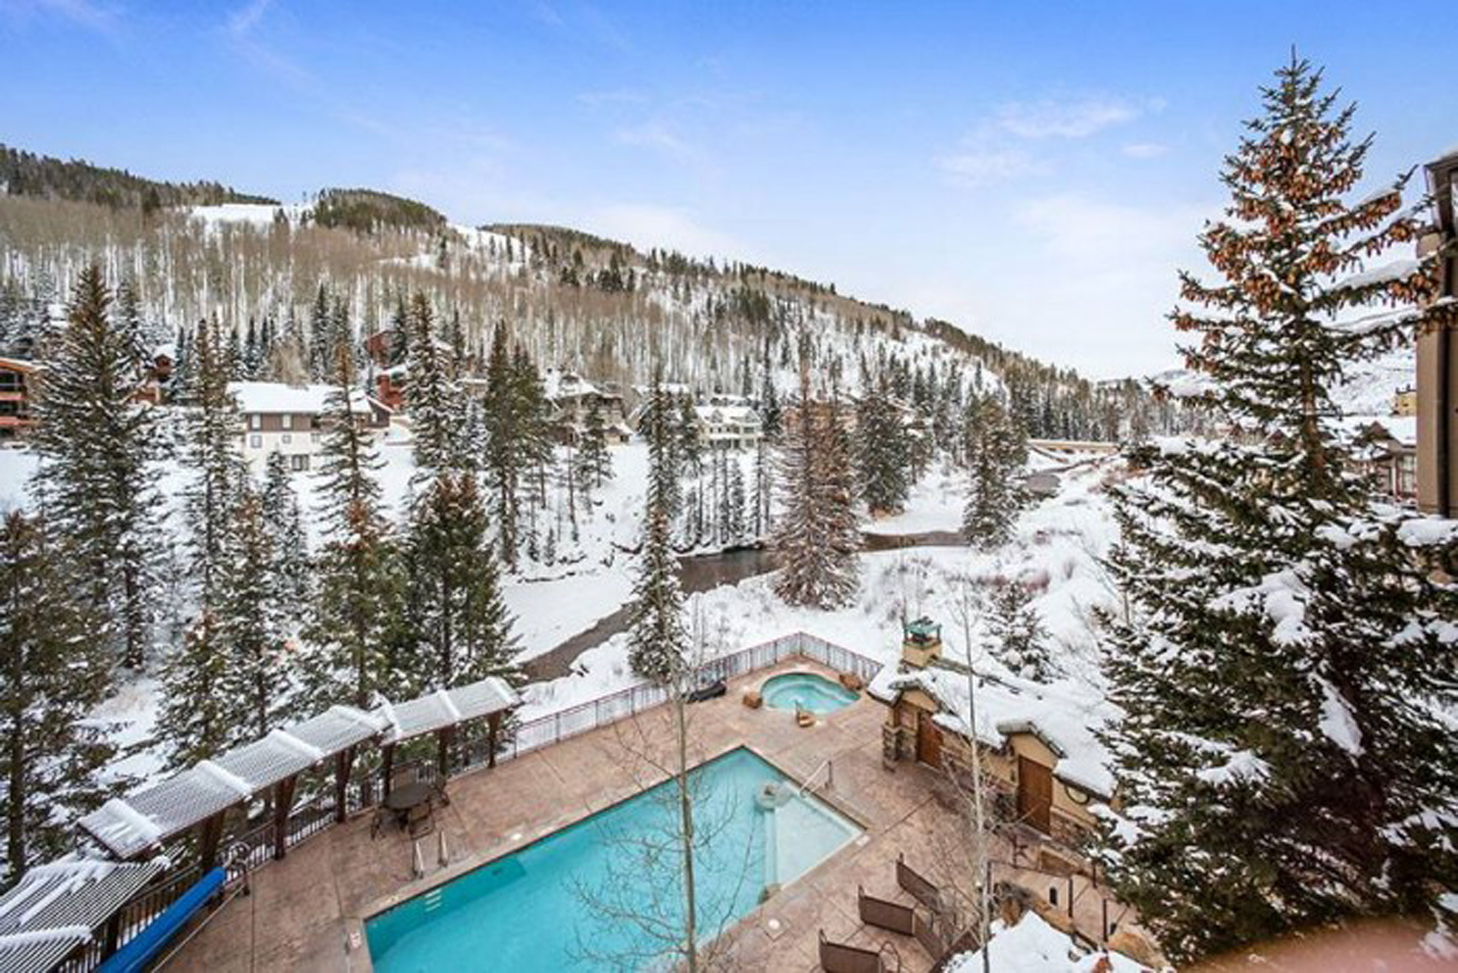 With views of Vail Mountain and Gore Creek, Antlers at Vail hotel’s year-round outdoor pool and hot tubs are perfect for relaxing after a long day of skiing and Thanksgiving fun.